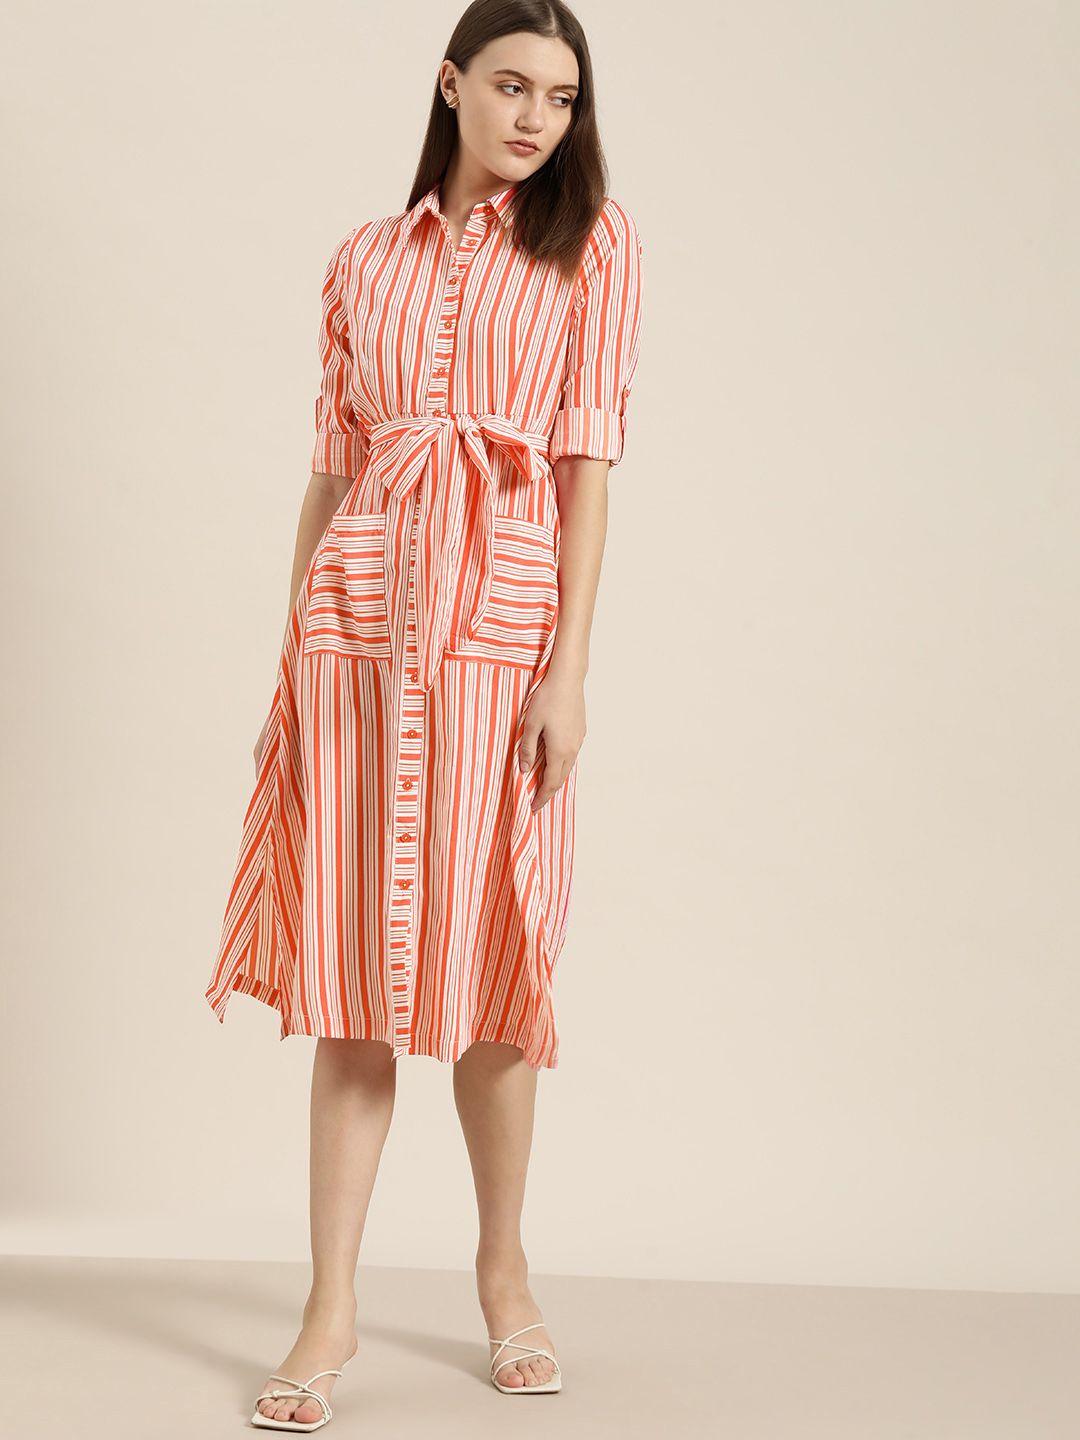 her-by-invictus-white-&-coral-orange-striped-shirt-midi-dress-with-belt